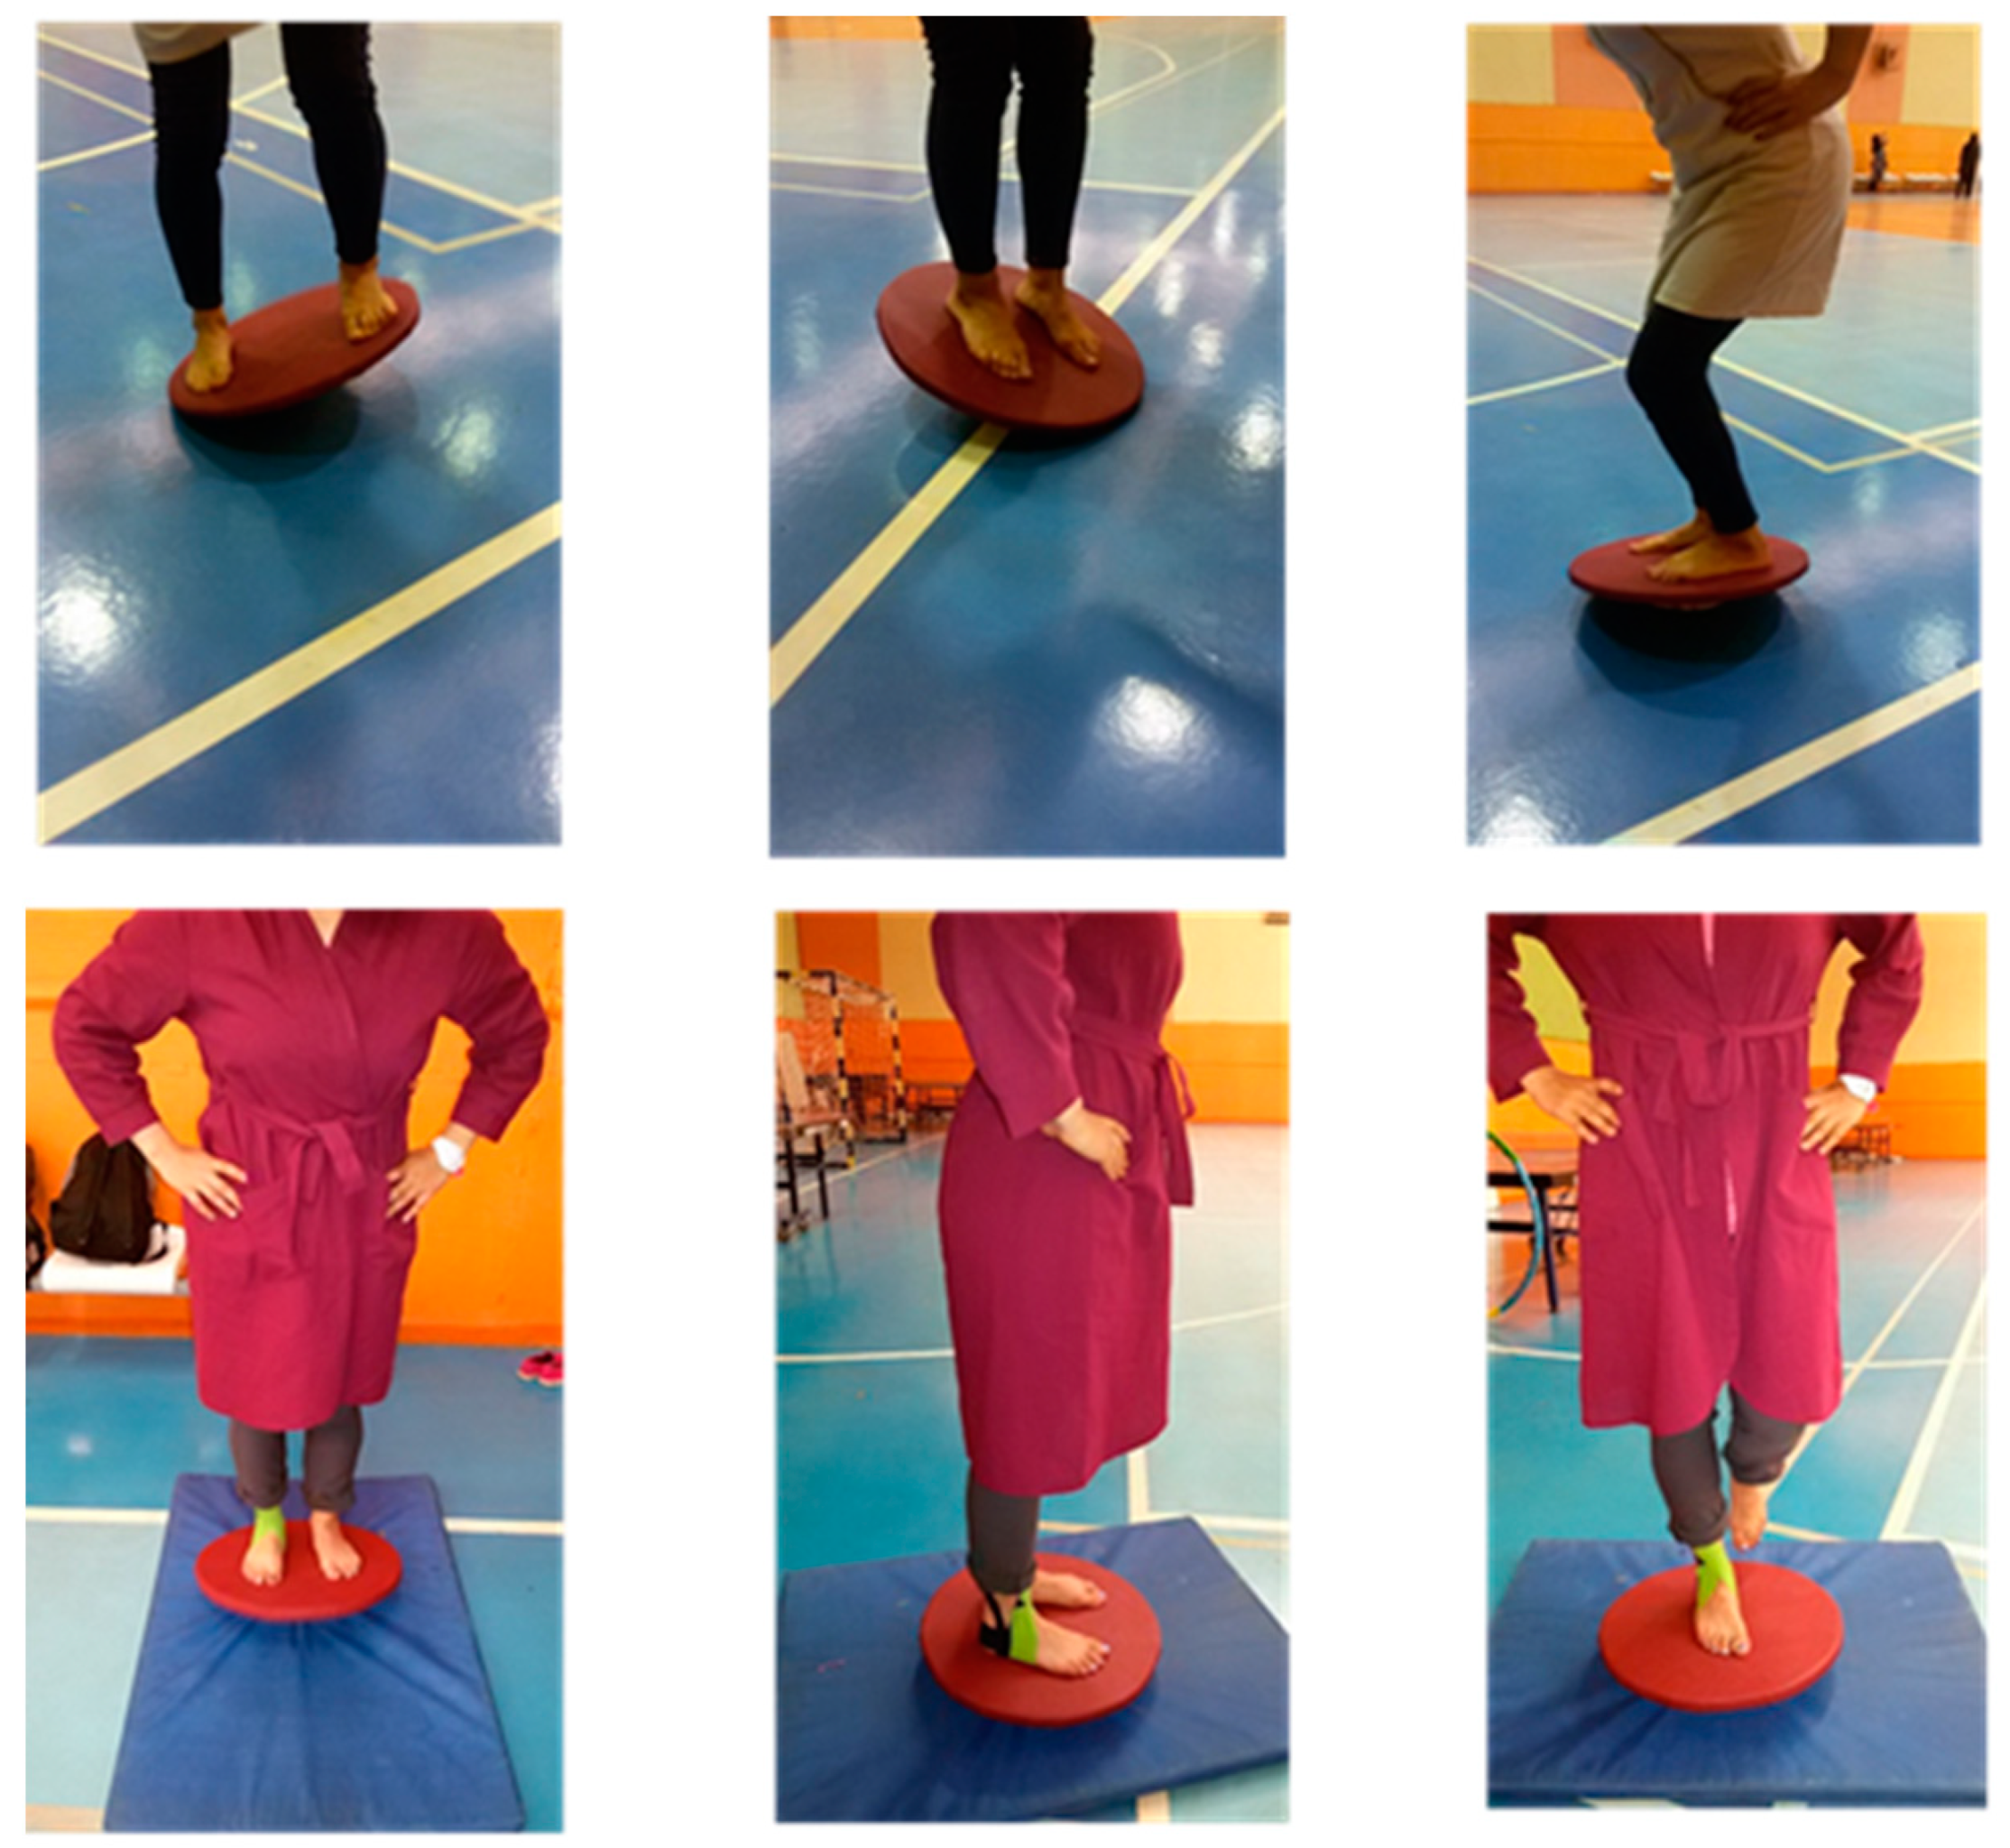 Resistance band jump- more advanced ankle stability exercise  Pediatric  physical therapy, Resistance band, Stability exercises